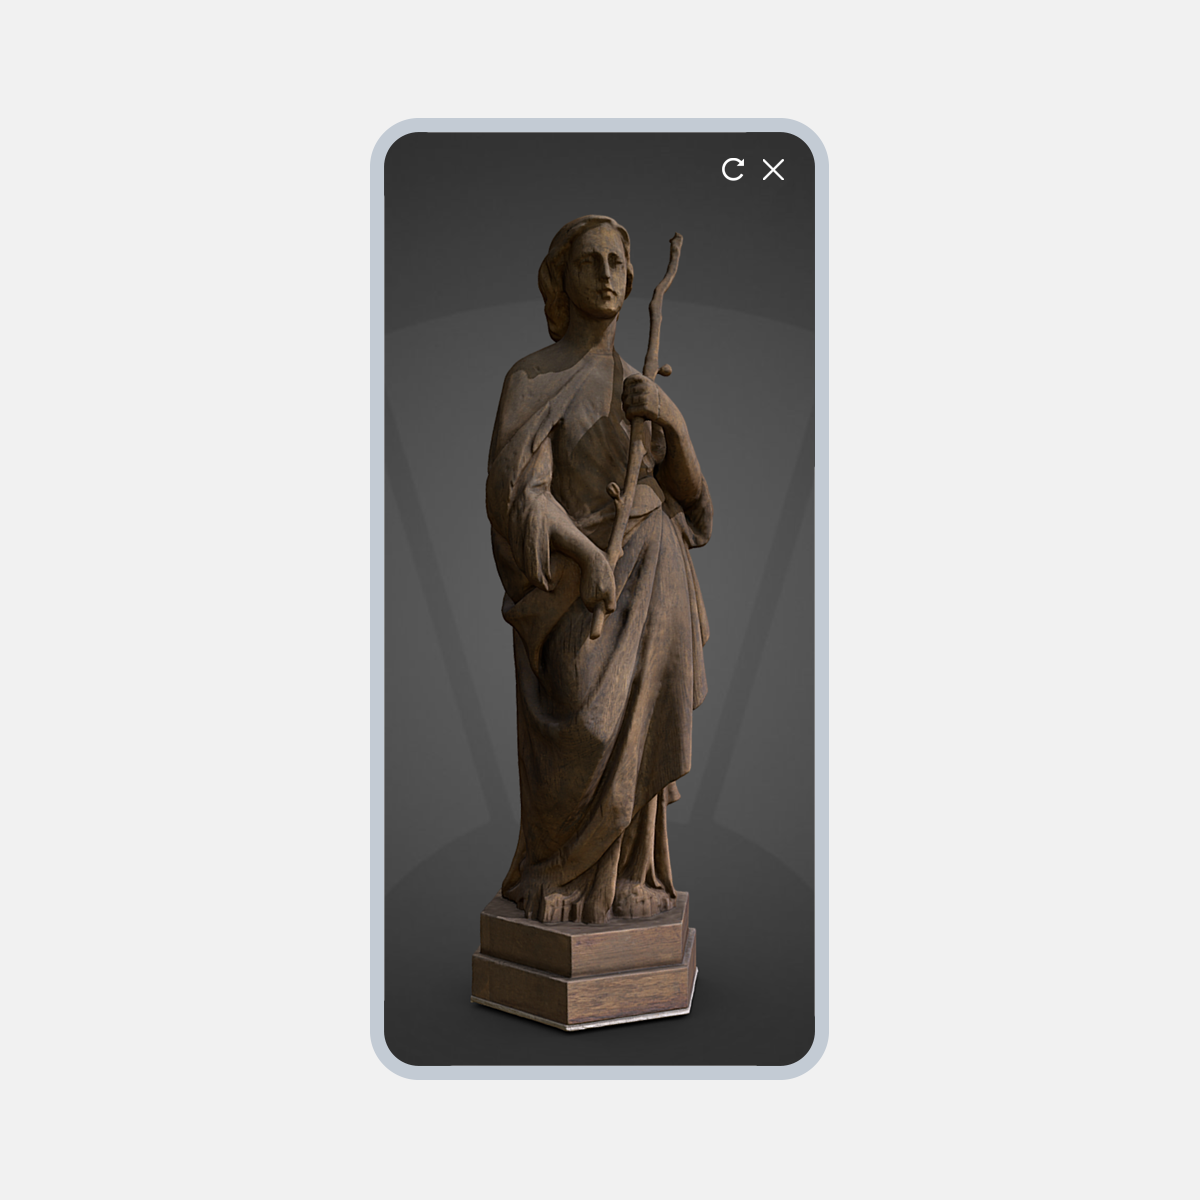 Small screen view from the collections showing a 3D statue